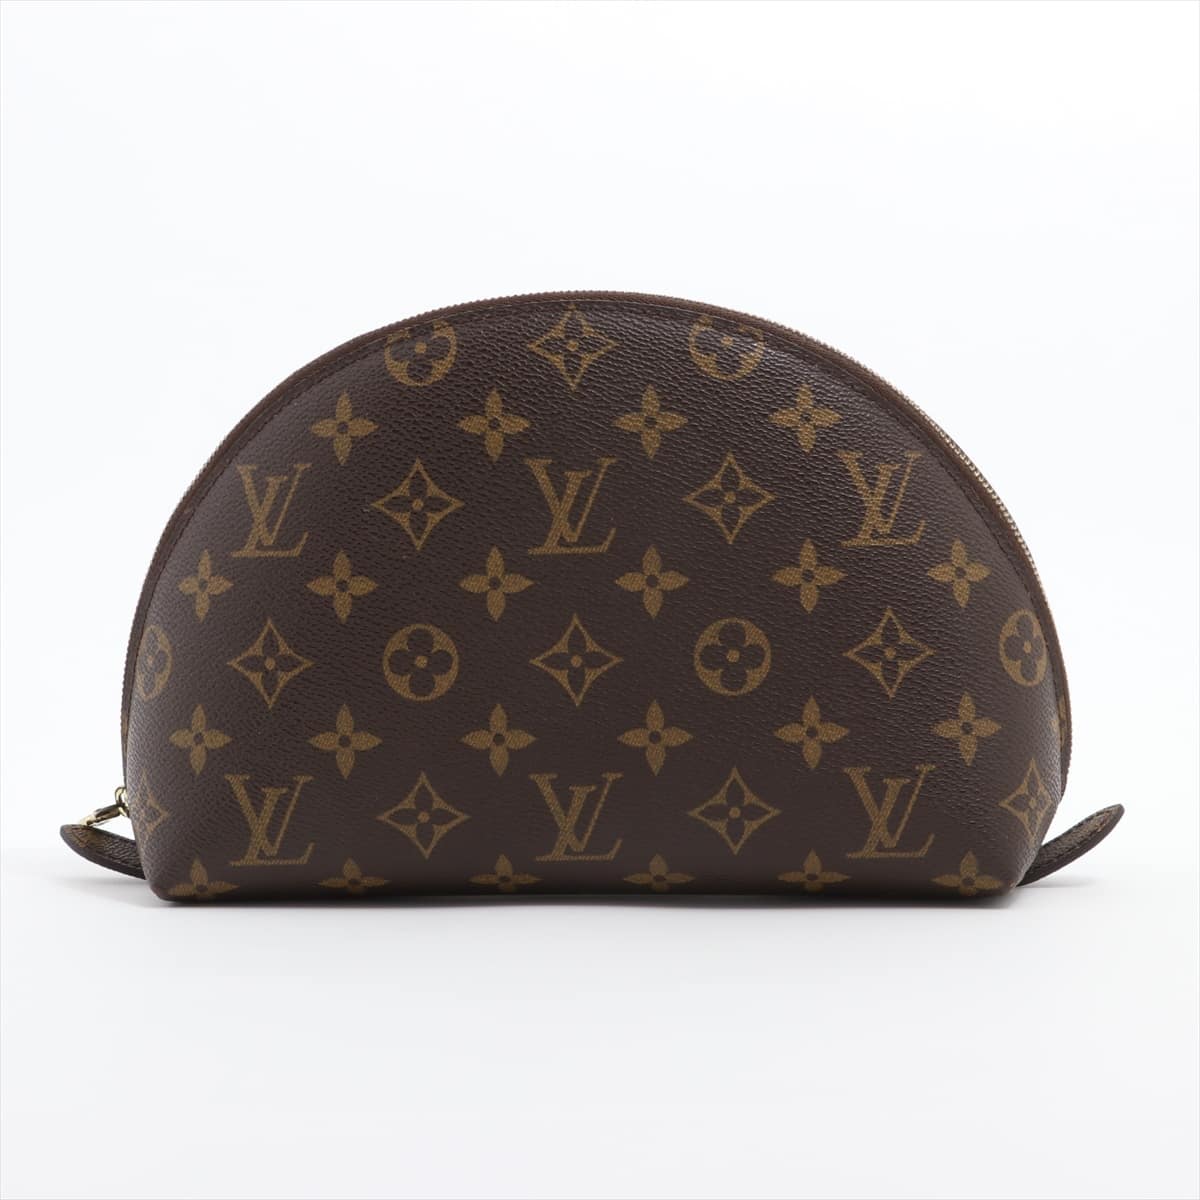 Louis Vuitton Monogram Toulouse Demilonde M47520 Brown Pouch There is bottom damage.There is a zipper peeling.